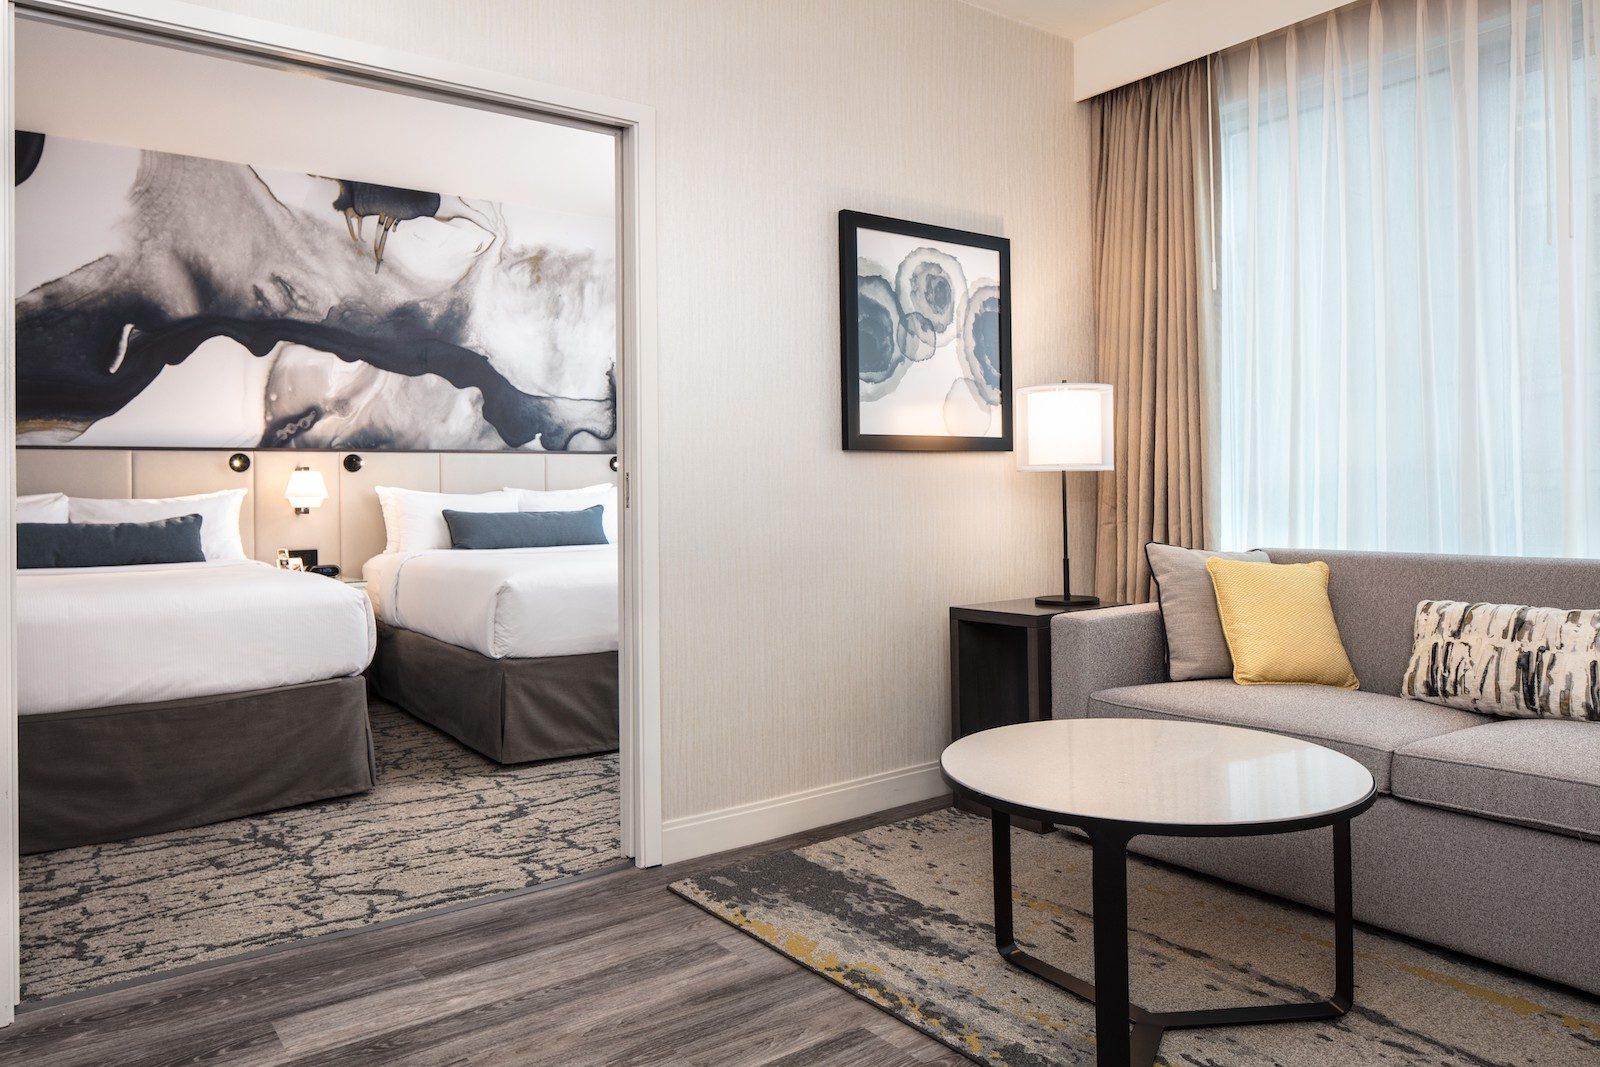 Delta Hotels by Marriott - Vancouver, BC